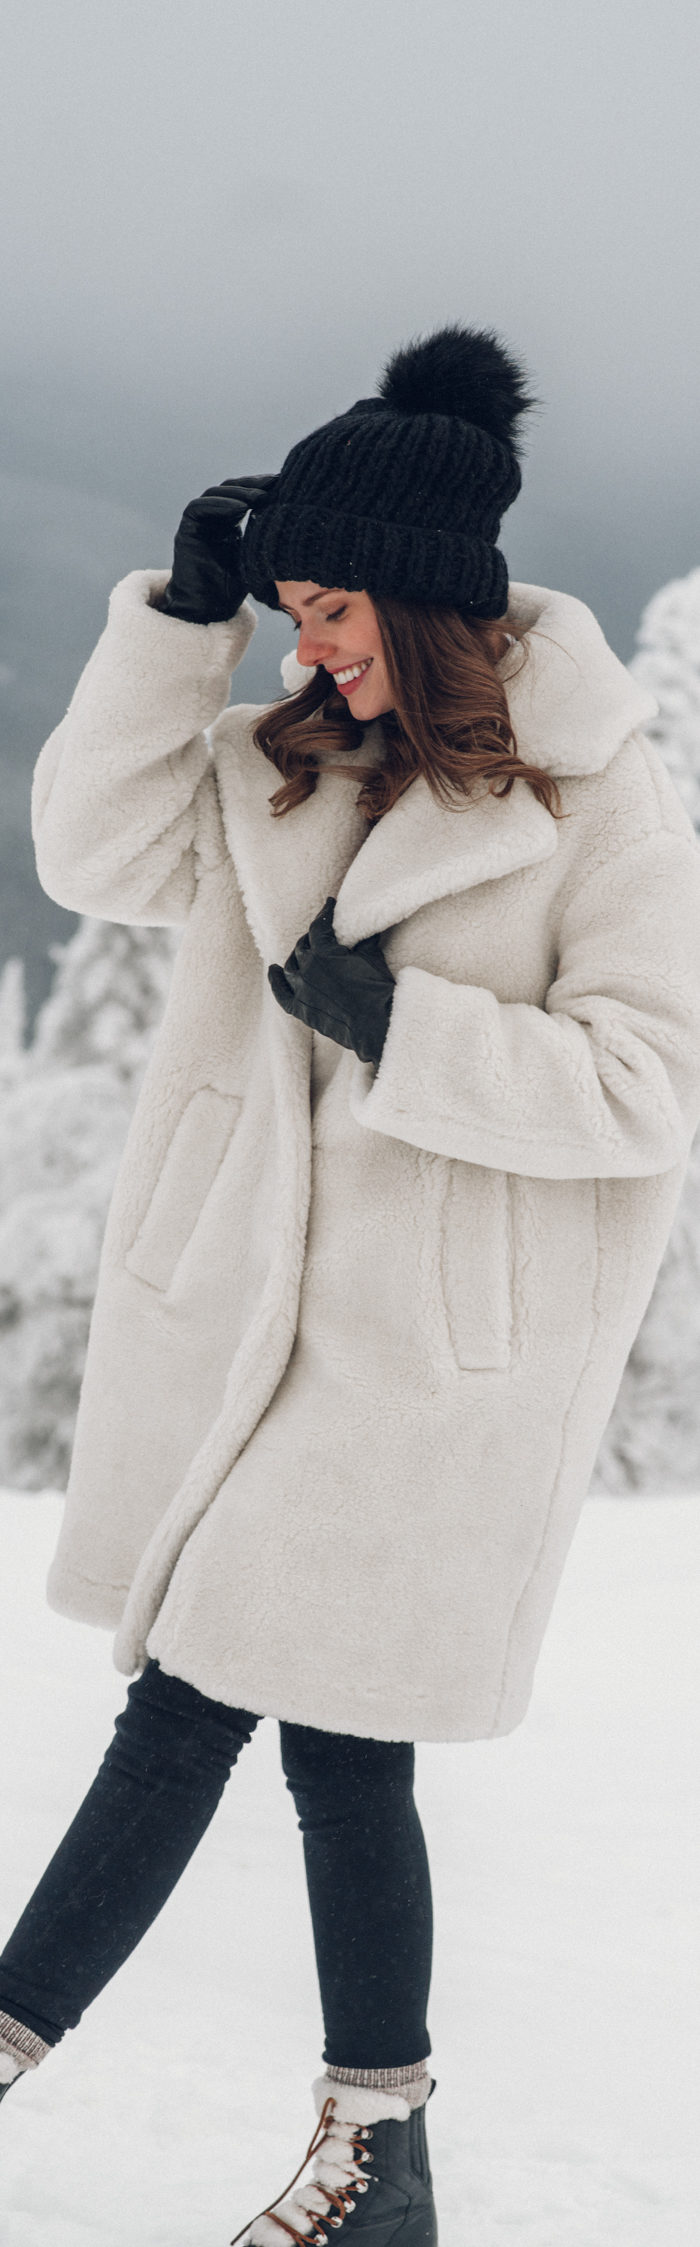 Alyssa Campanella of The A List blog visits Tremblant in Québec wearing And Other Stories faux fur coat